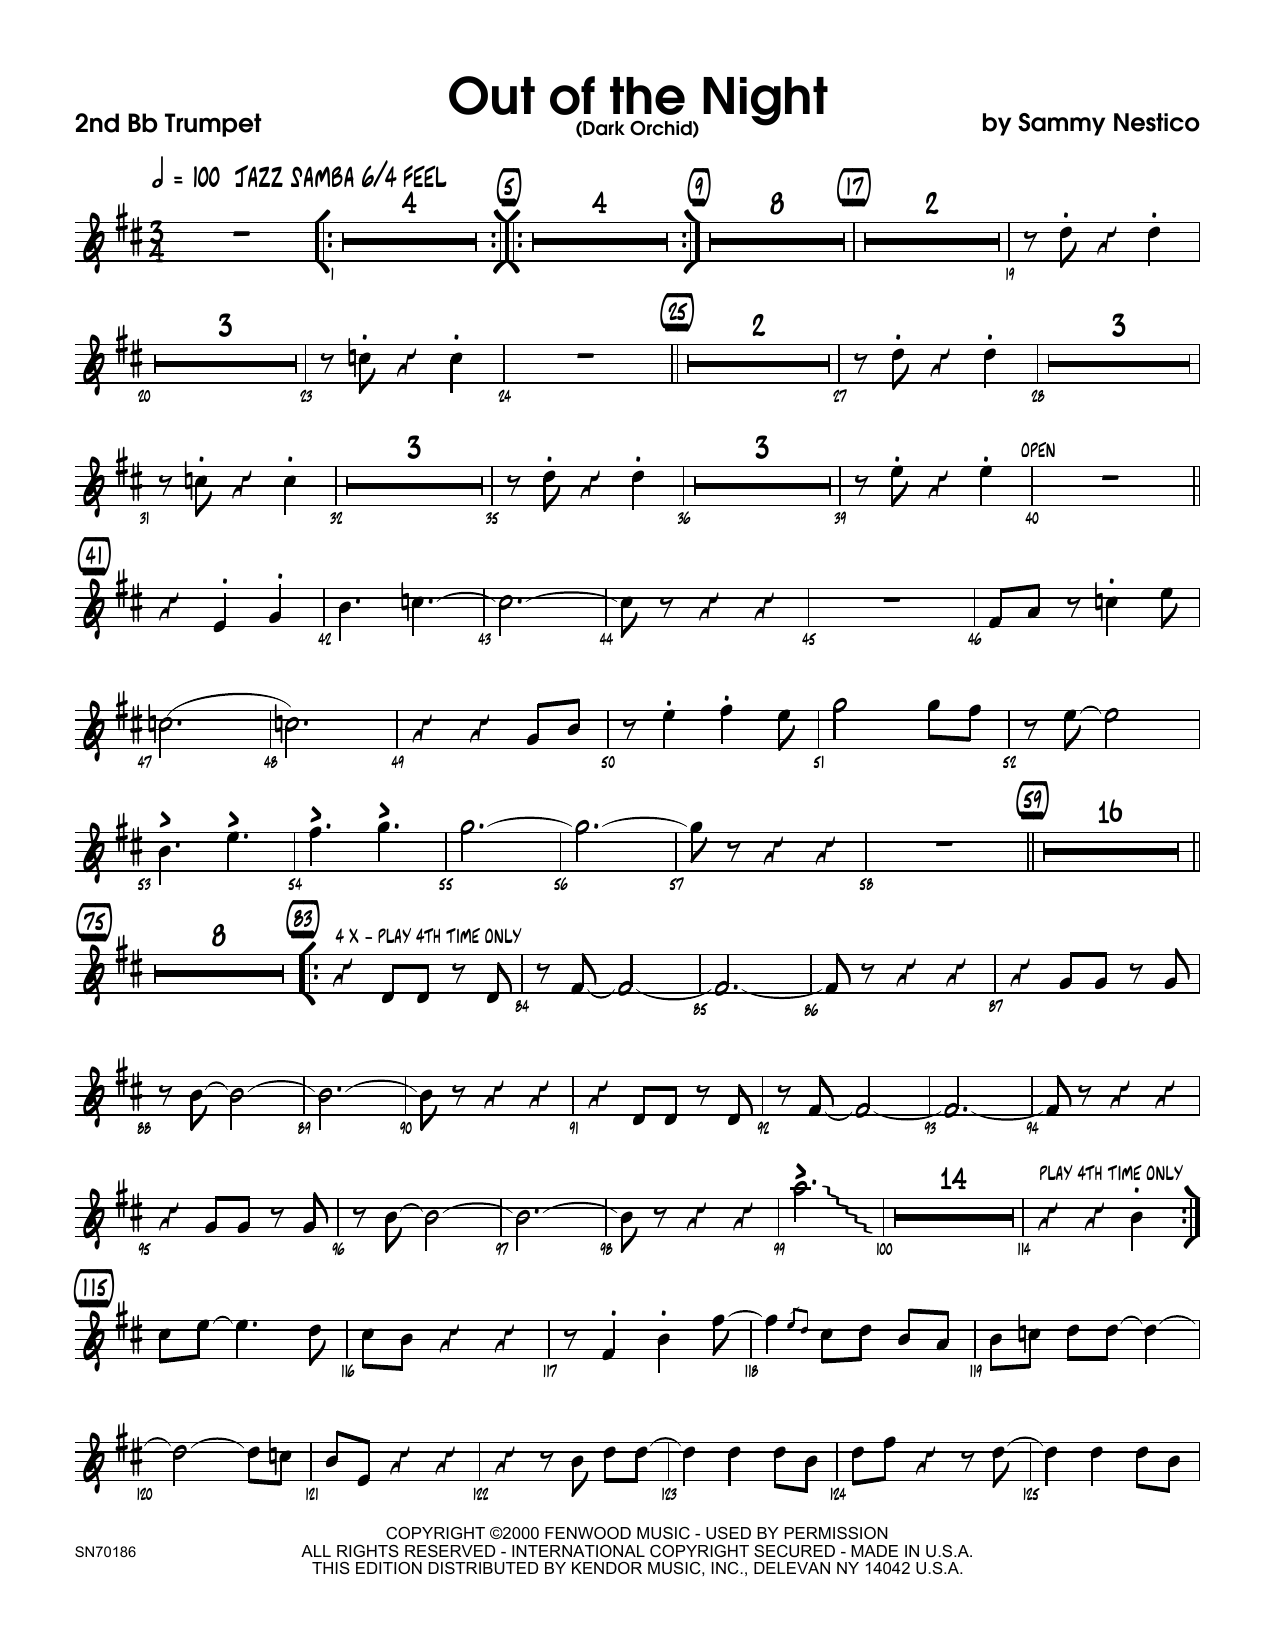 Download Sammy Nestico Out of the Night - 2nd Bb Trumpet Sheet Music